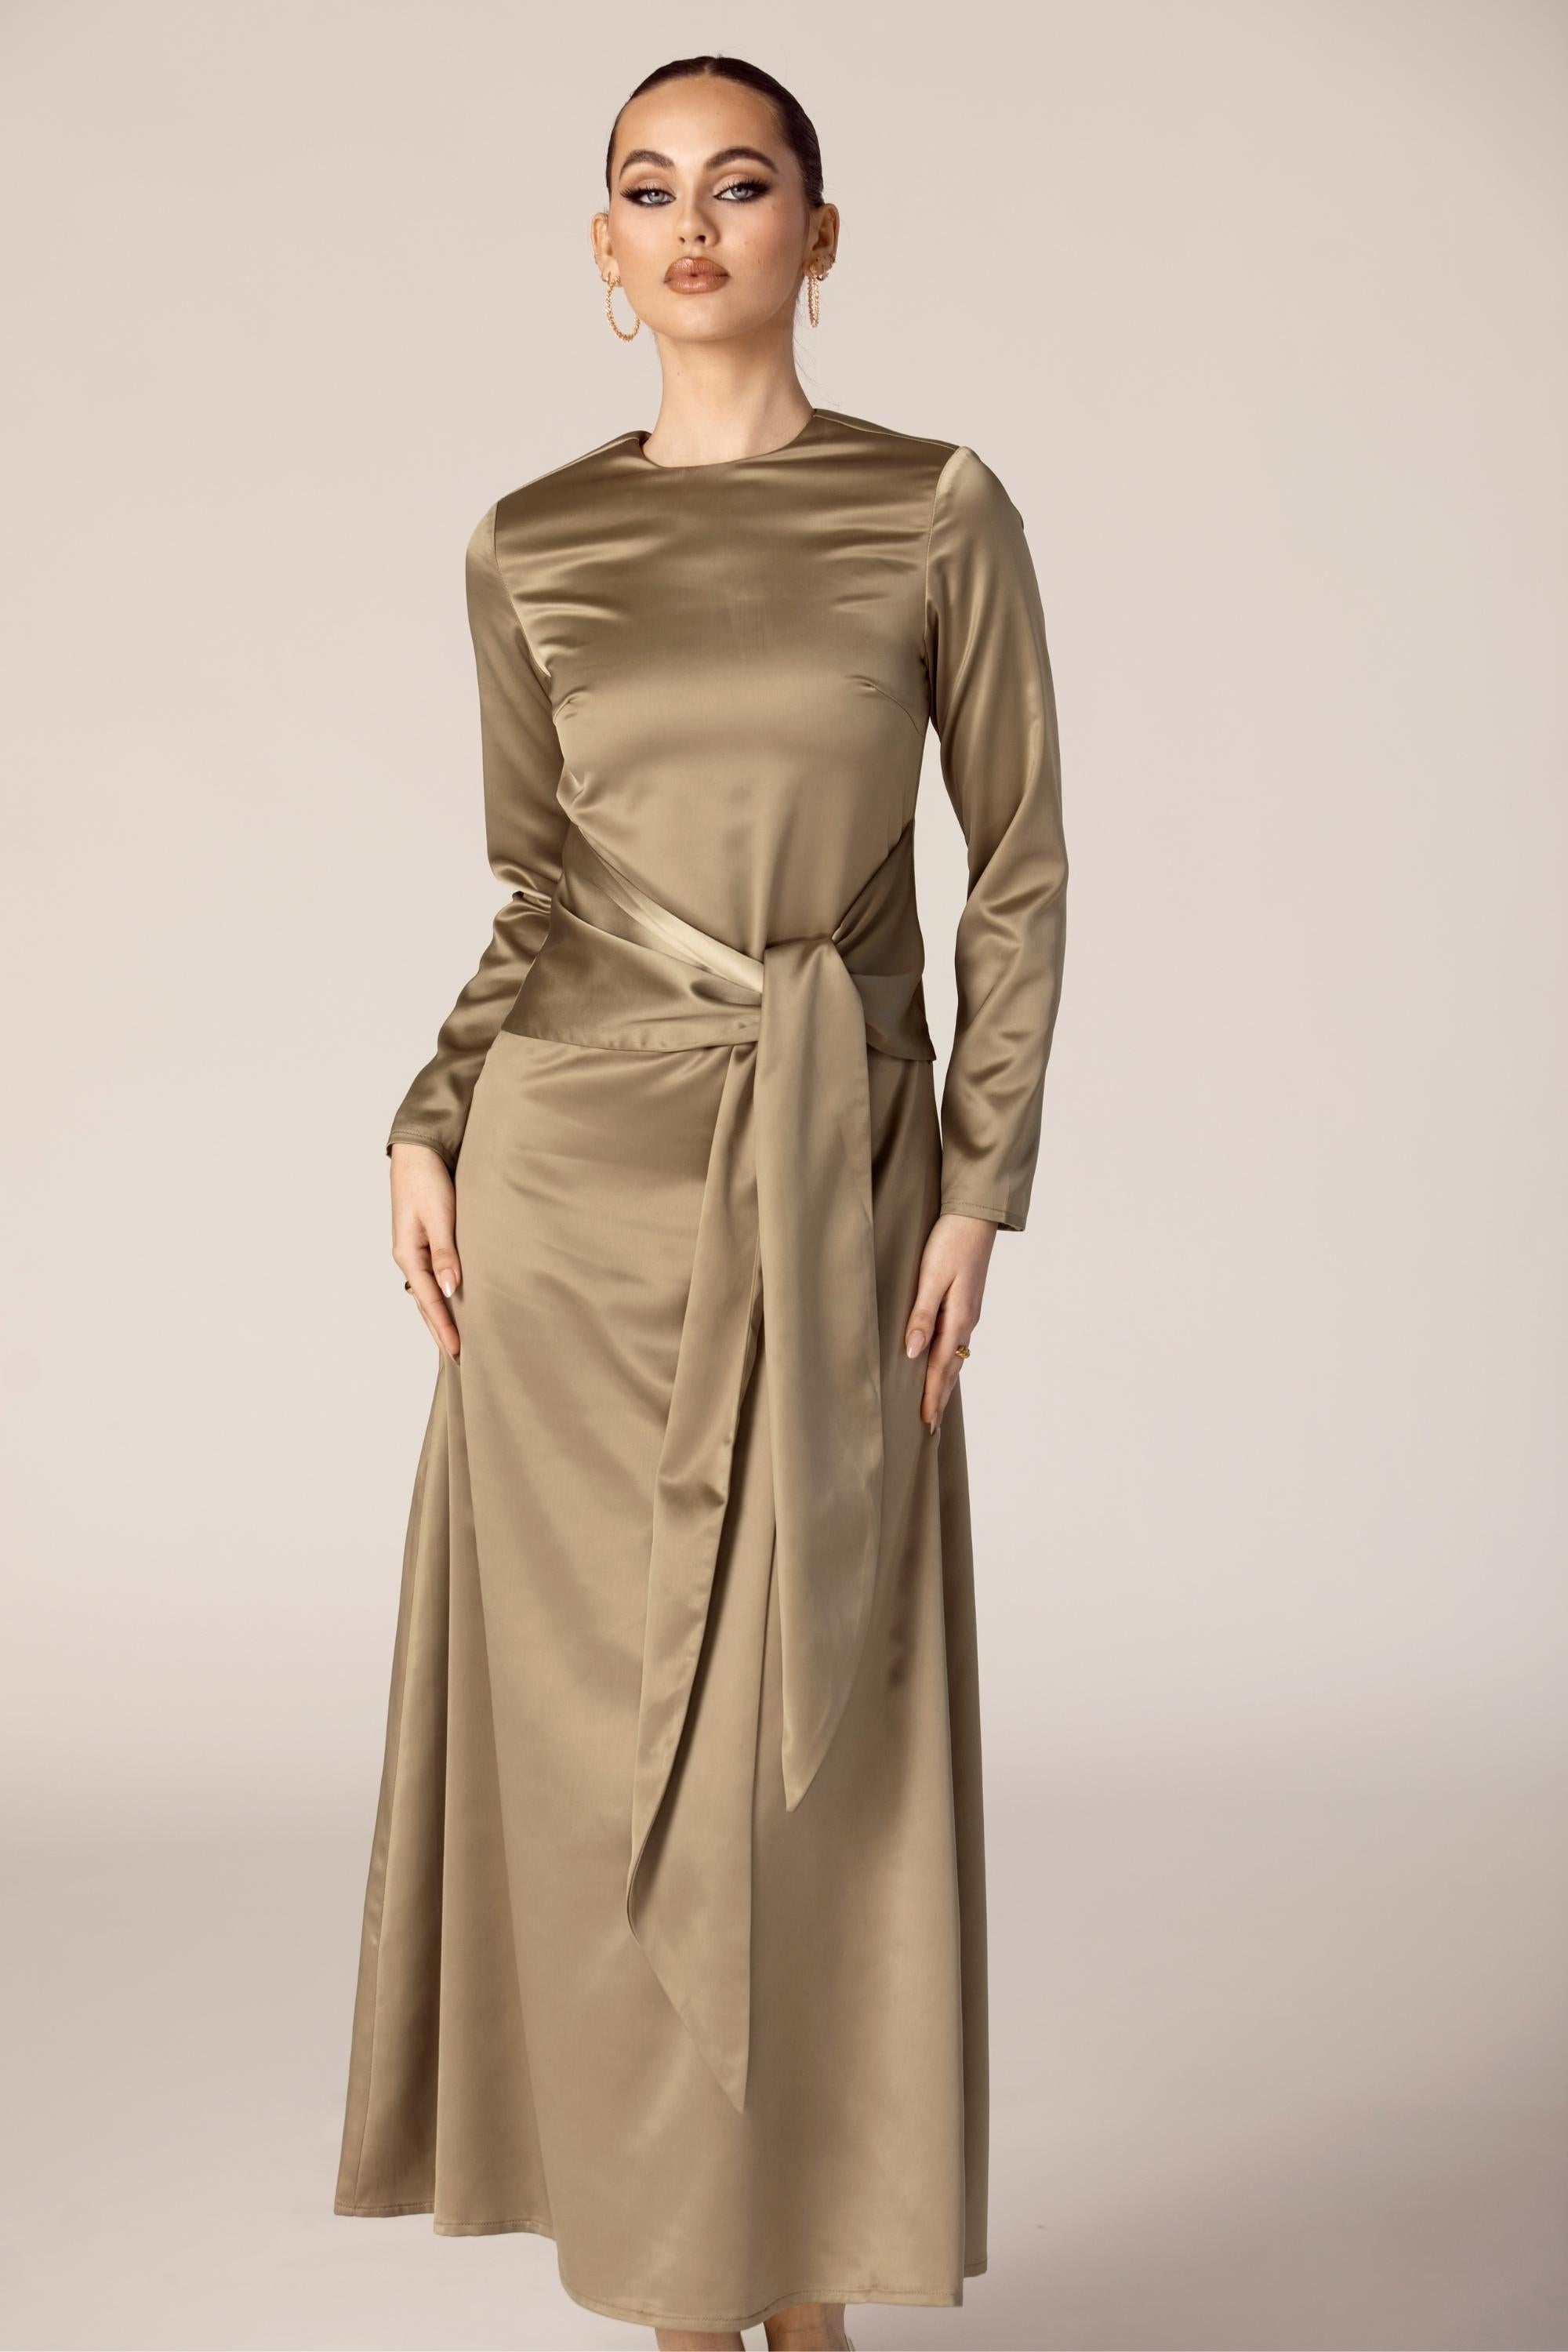 Ana Satin Tie Front Satin Maxi Dress - Olive Veiled Collection 